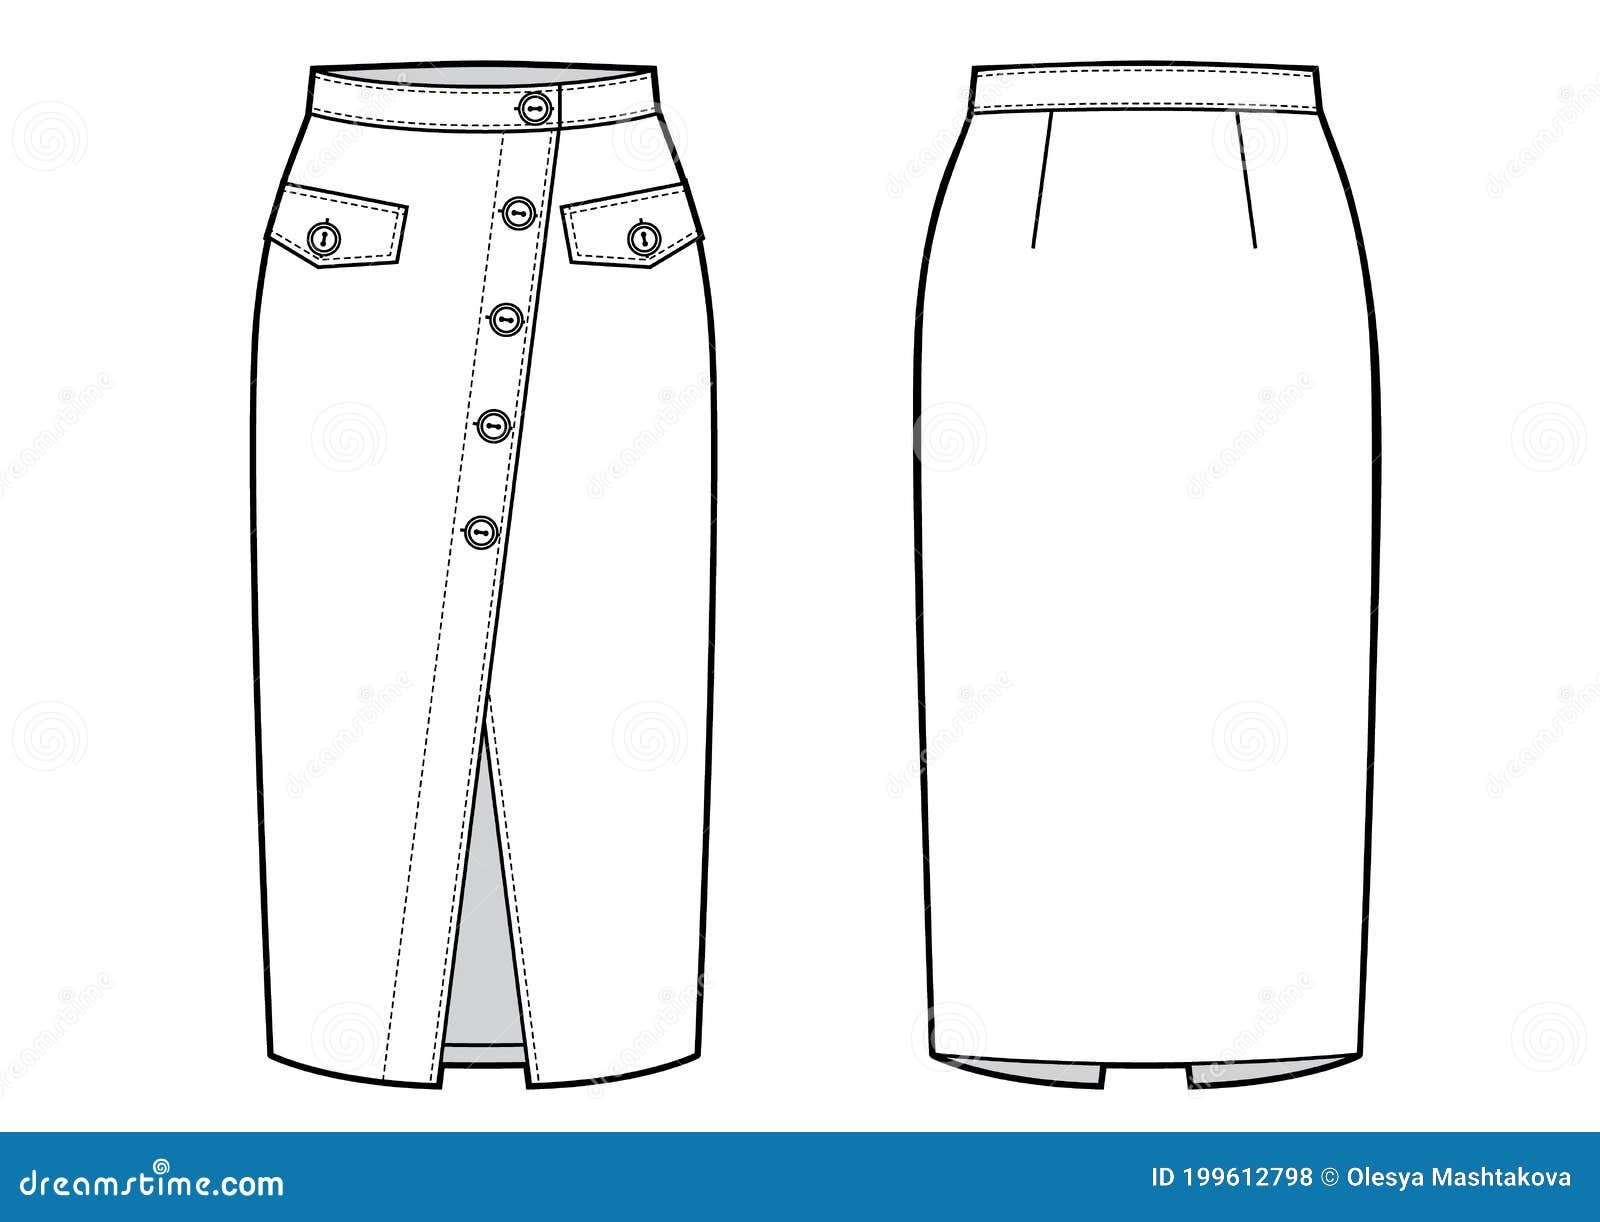 181 Skirts Specification Drawing Images Stock Photos  Vectors   Shutterstock